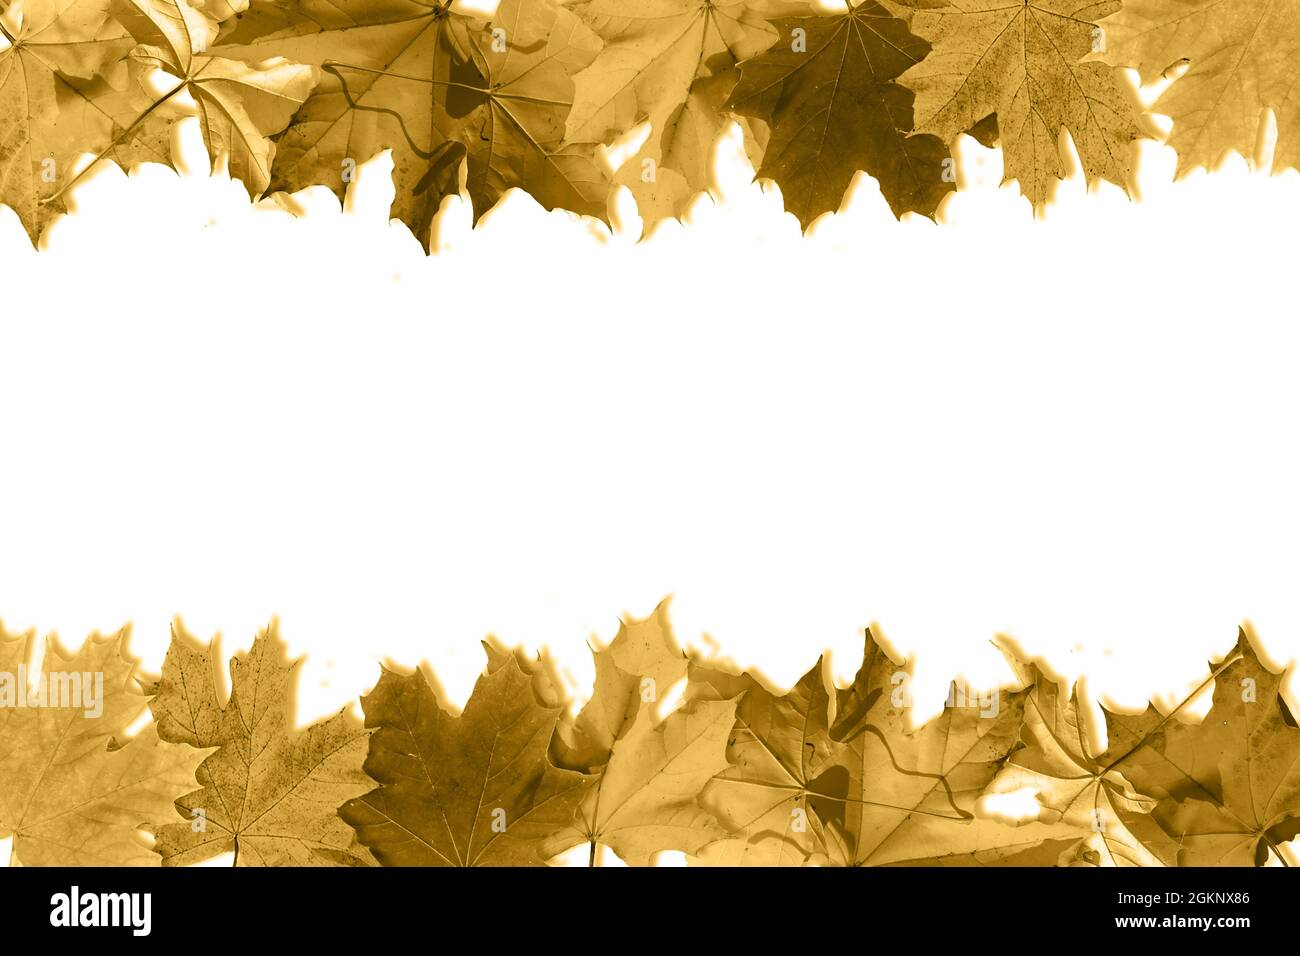 Autumn composition. Pattern made of autumn golden leaves on white background. Flat lay, top view, copy space Stock Photo